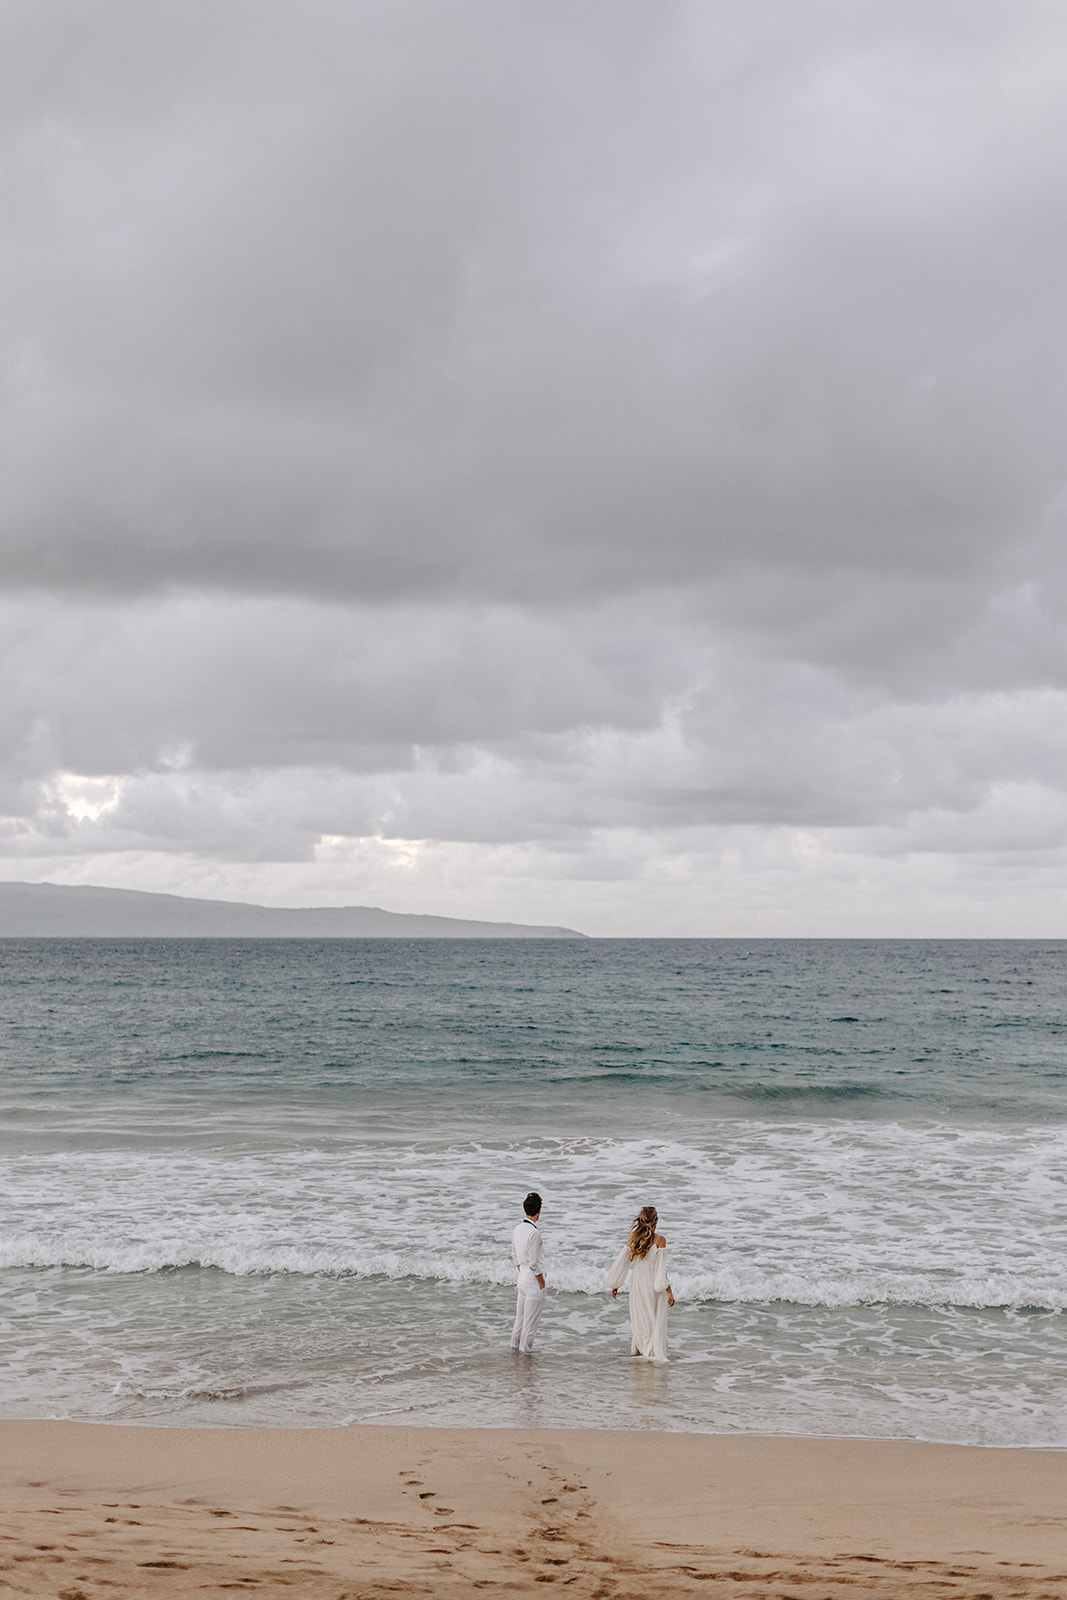 A wedding couple watches the ocean after getting married at sunset in Maui, Hawaii 